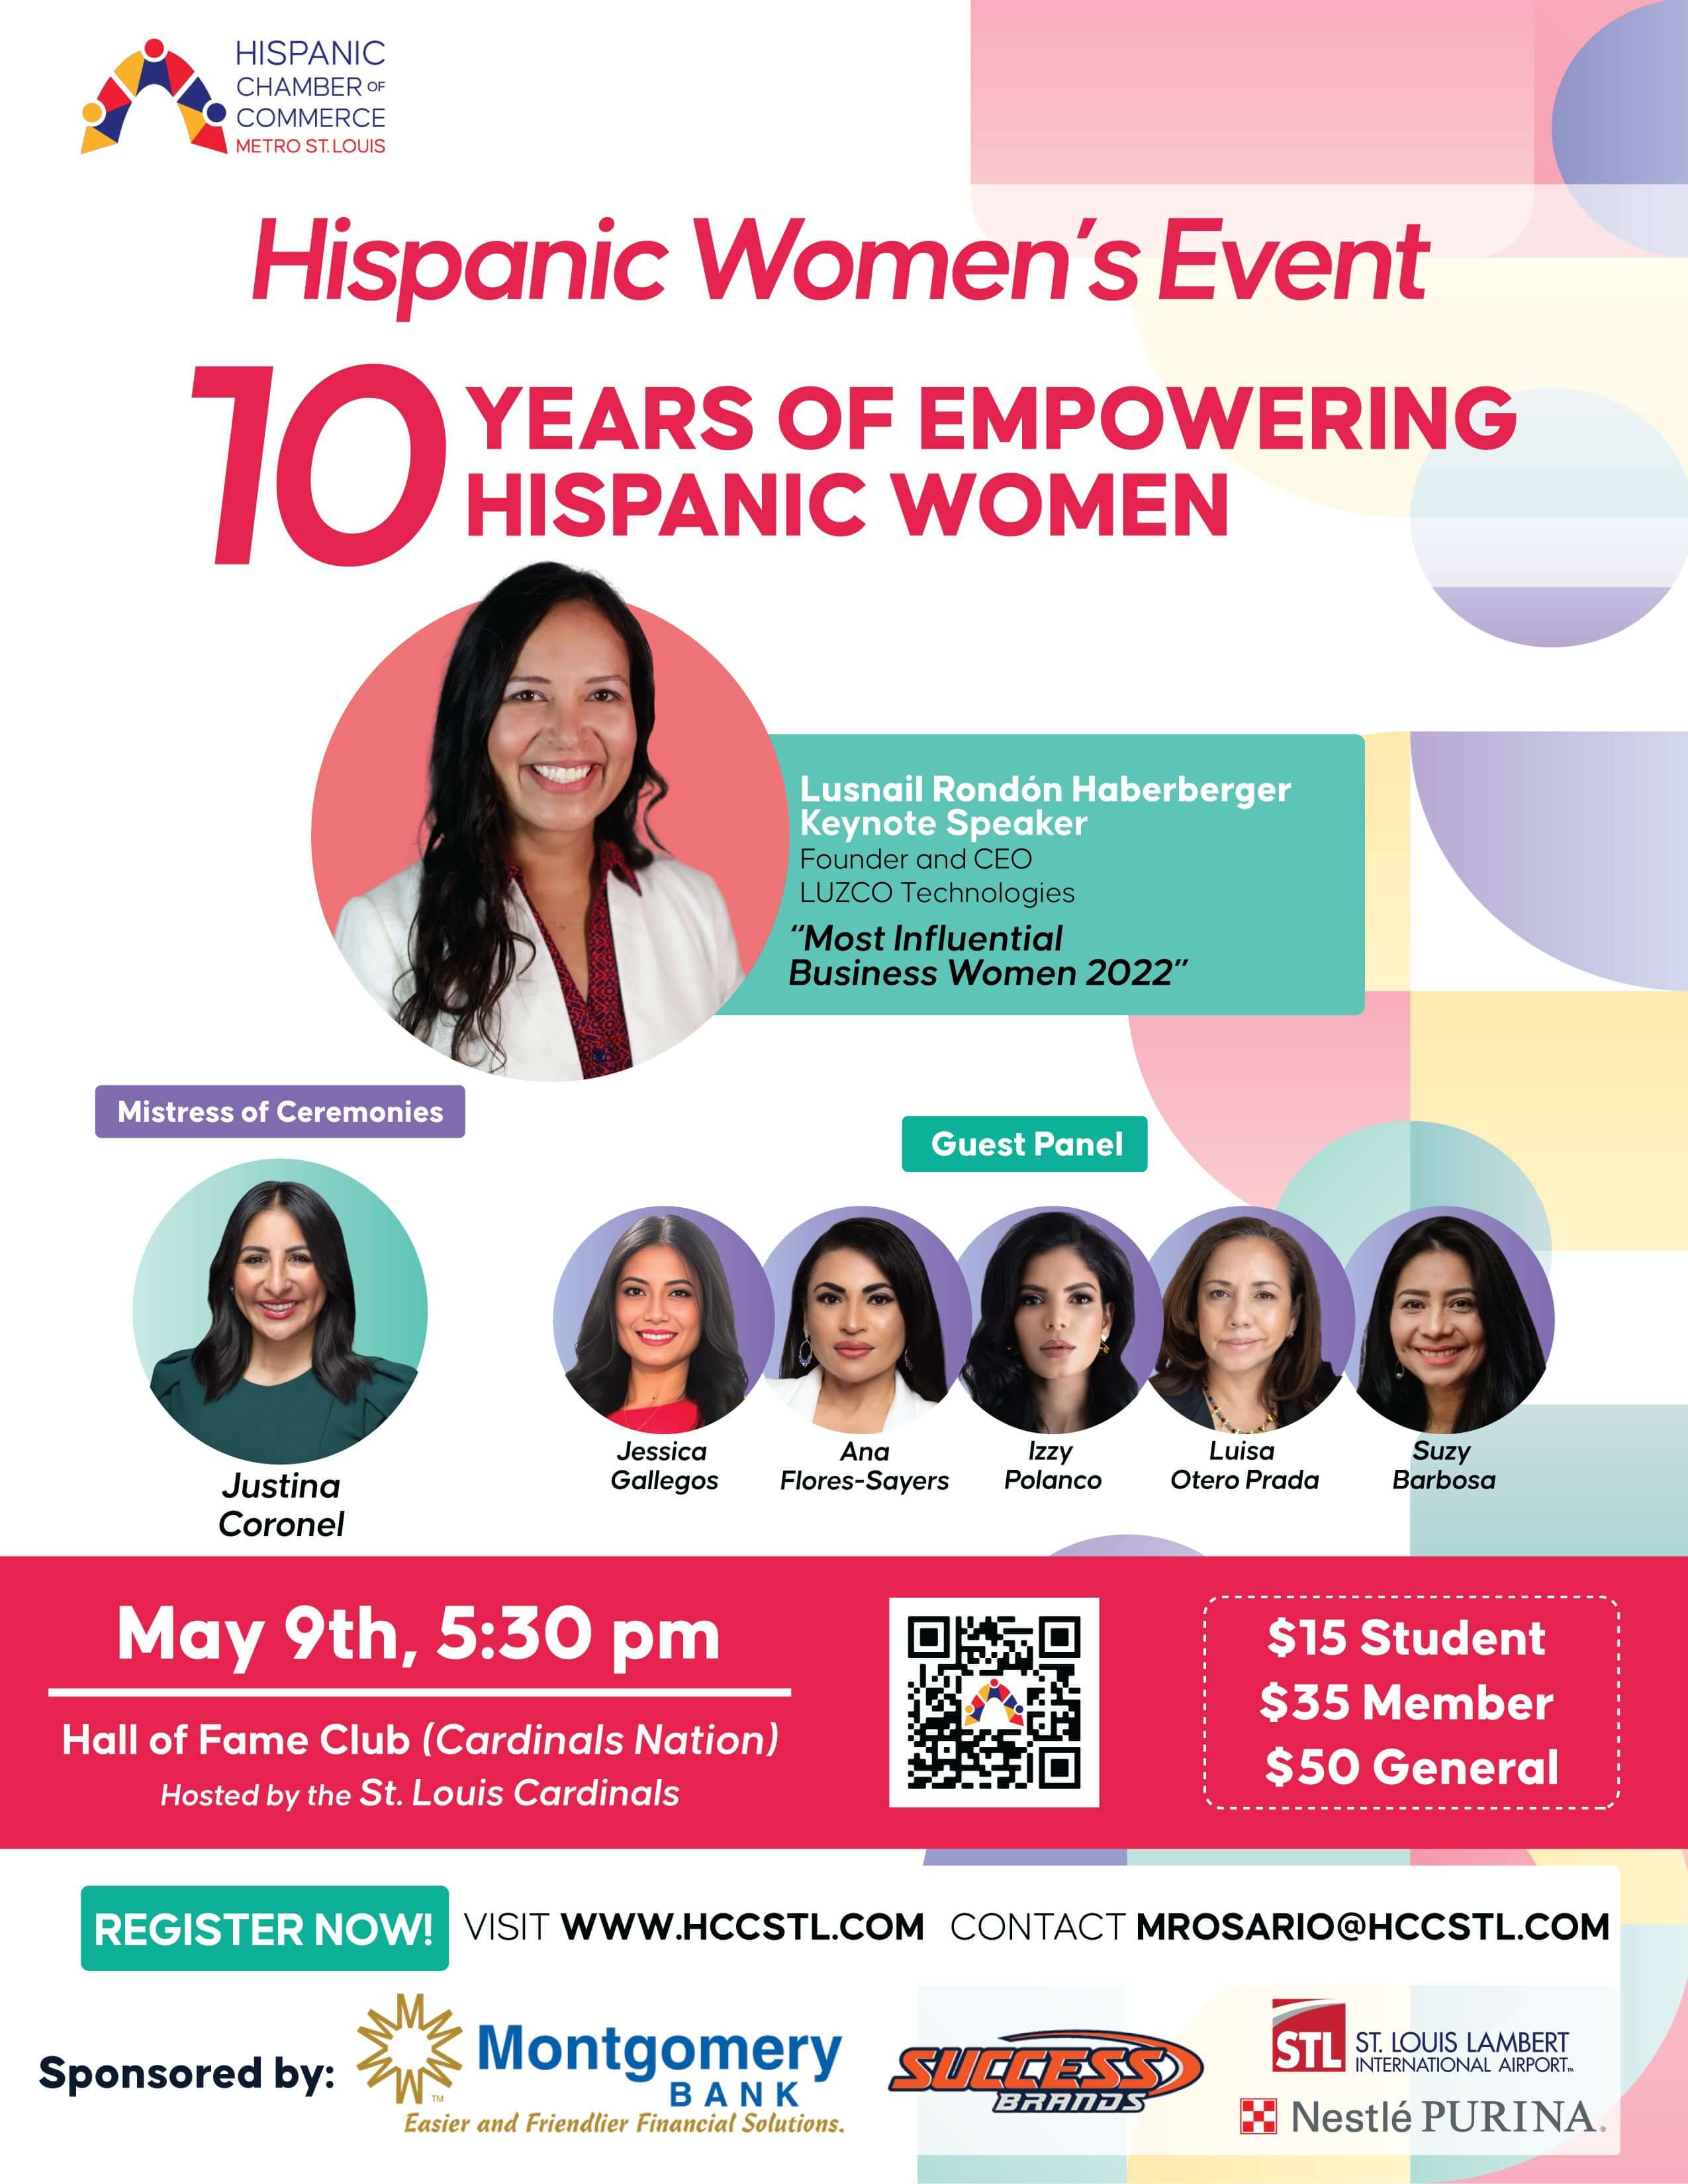 Banner for our annual Hispanic Women's Event. Hosted at the Cardinals Nation Hall of Fame Club on May 9th at 5:30pm